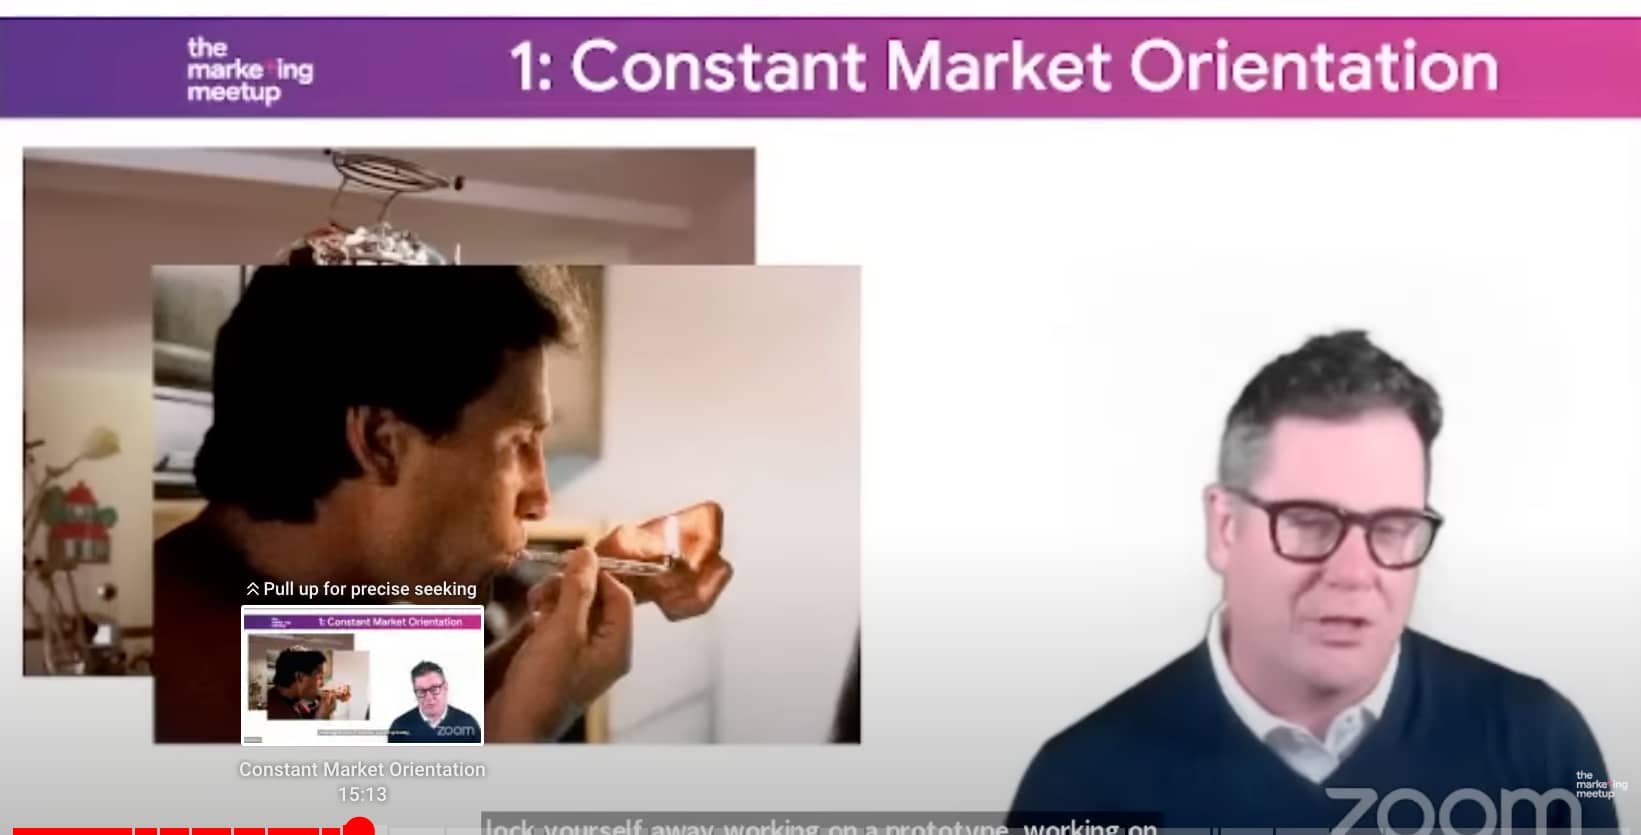 Slide depicting Constant Market Orientation in small businesses